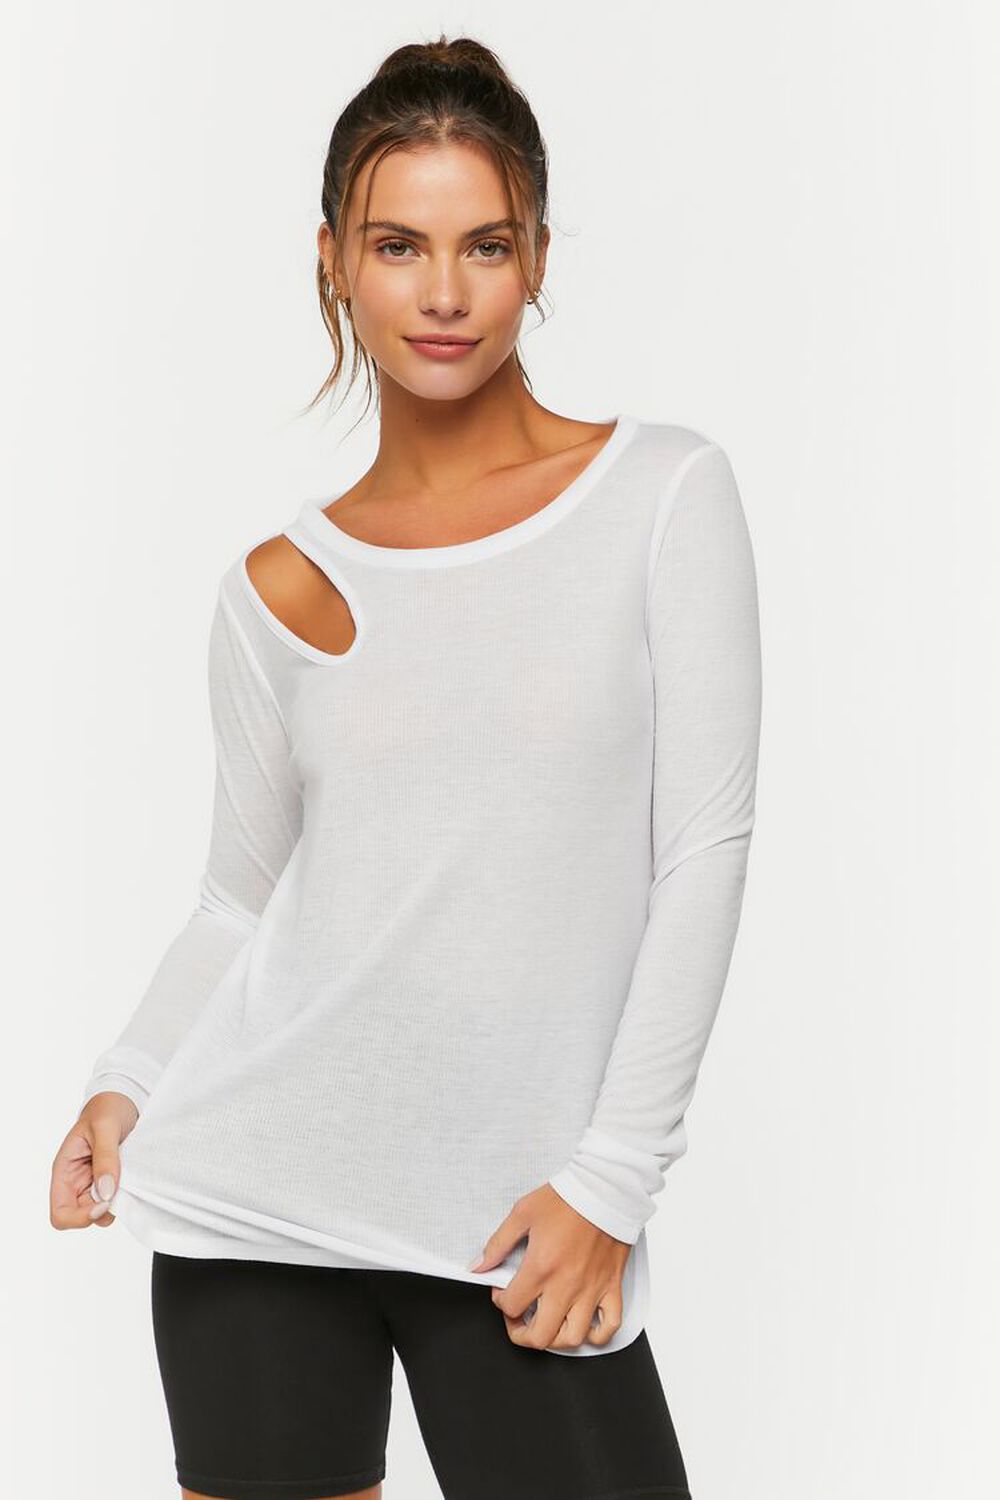 WHITE Active Cutout Long-Sleeve Top, image 1